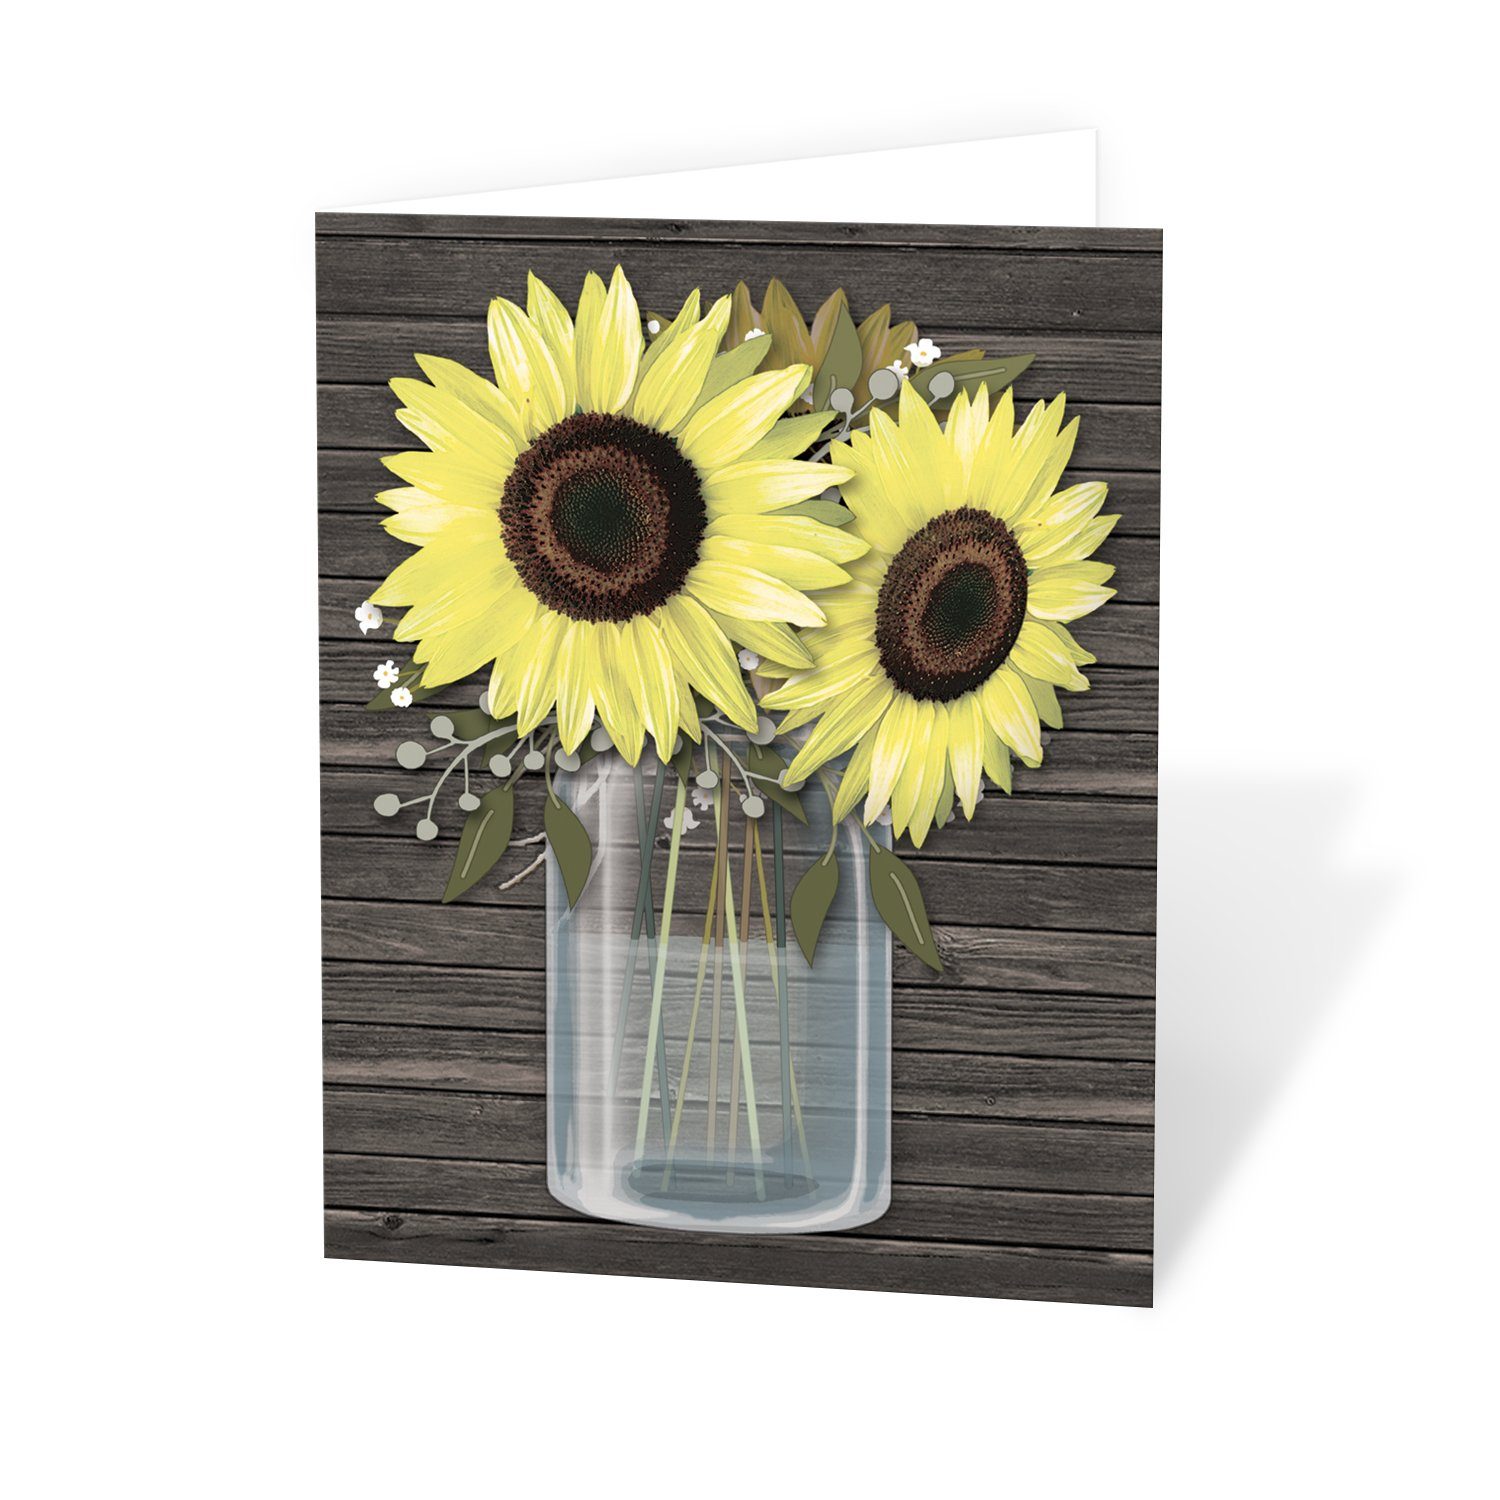 Sunflower and wood design Baby Shower Seed Packets